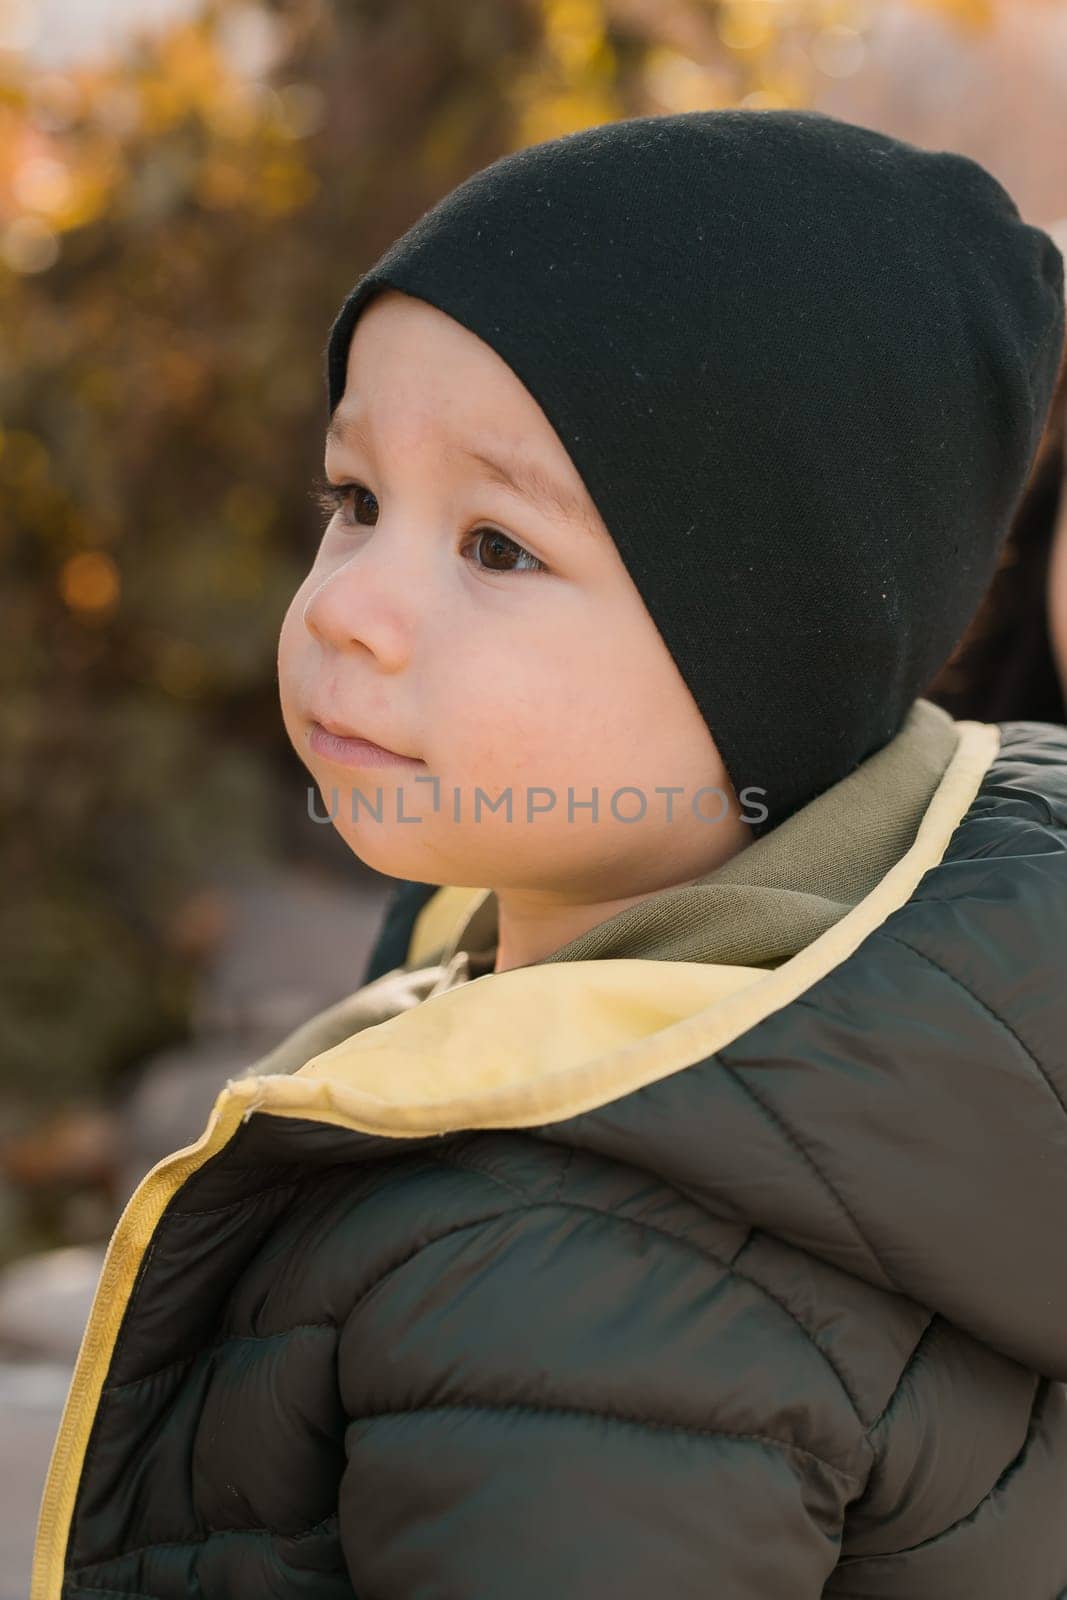 Little child boy playing in autumn park in Asia. Toddler cute Korean kid portrait close-up outdoors by Satura86